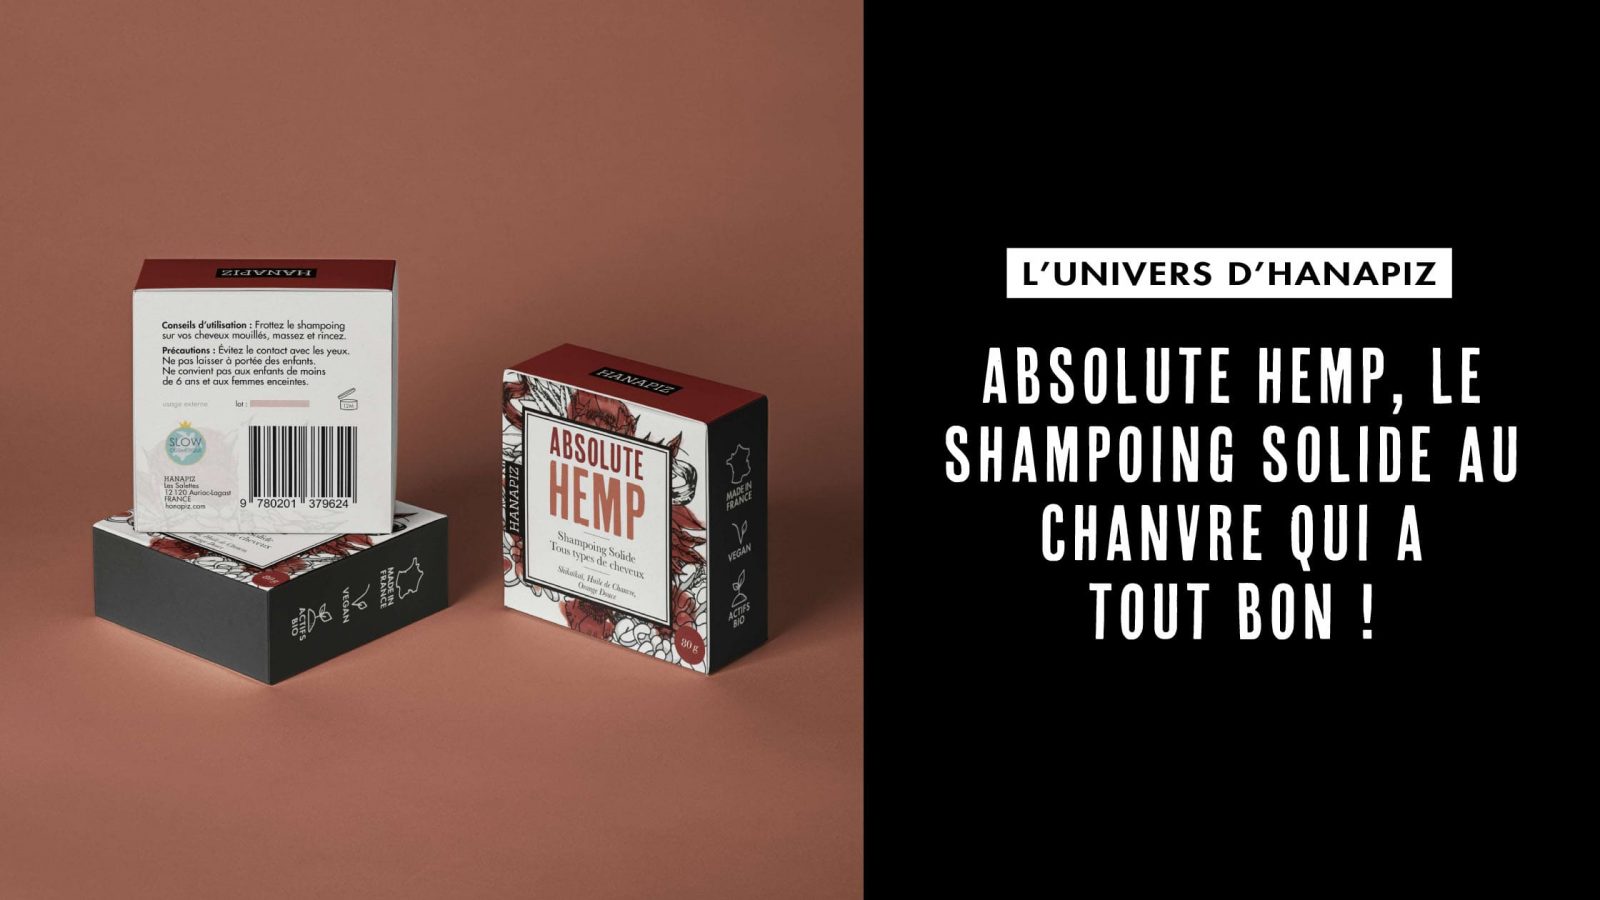 Shampoing solide au chanvre